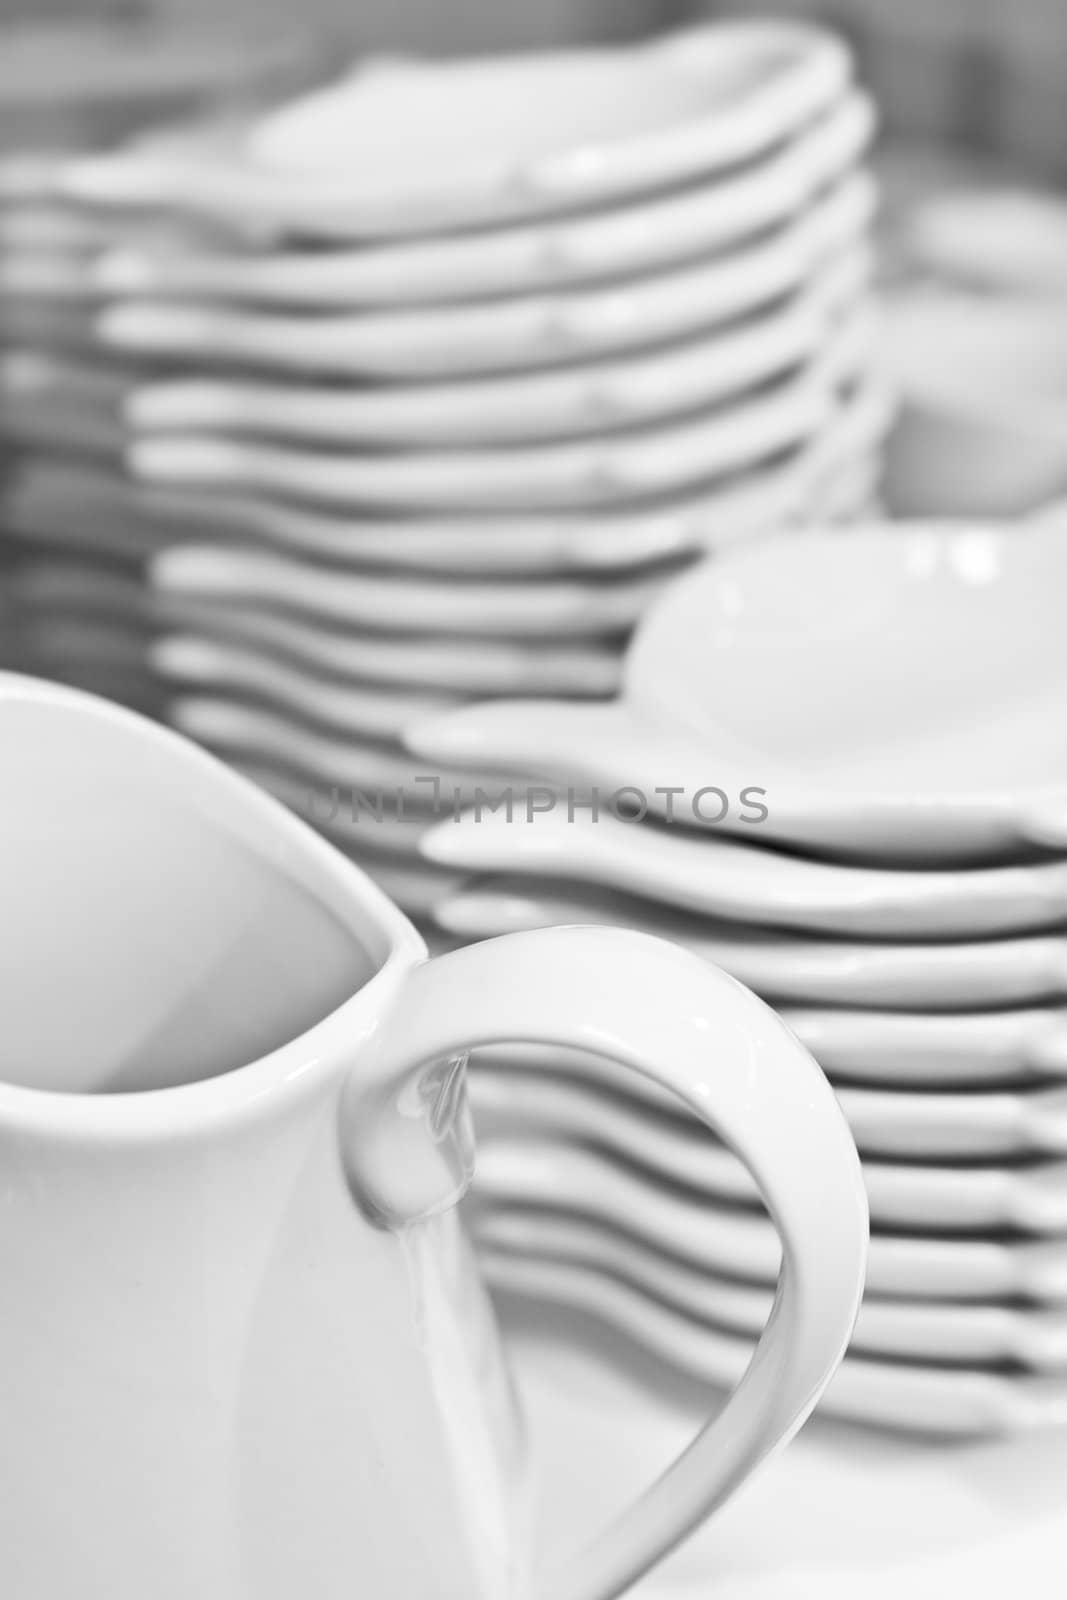 pile of clean plates by ctacik